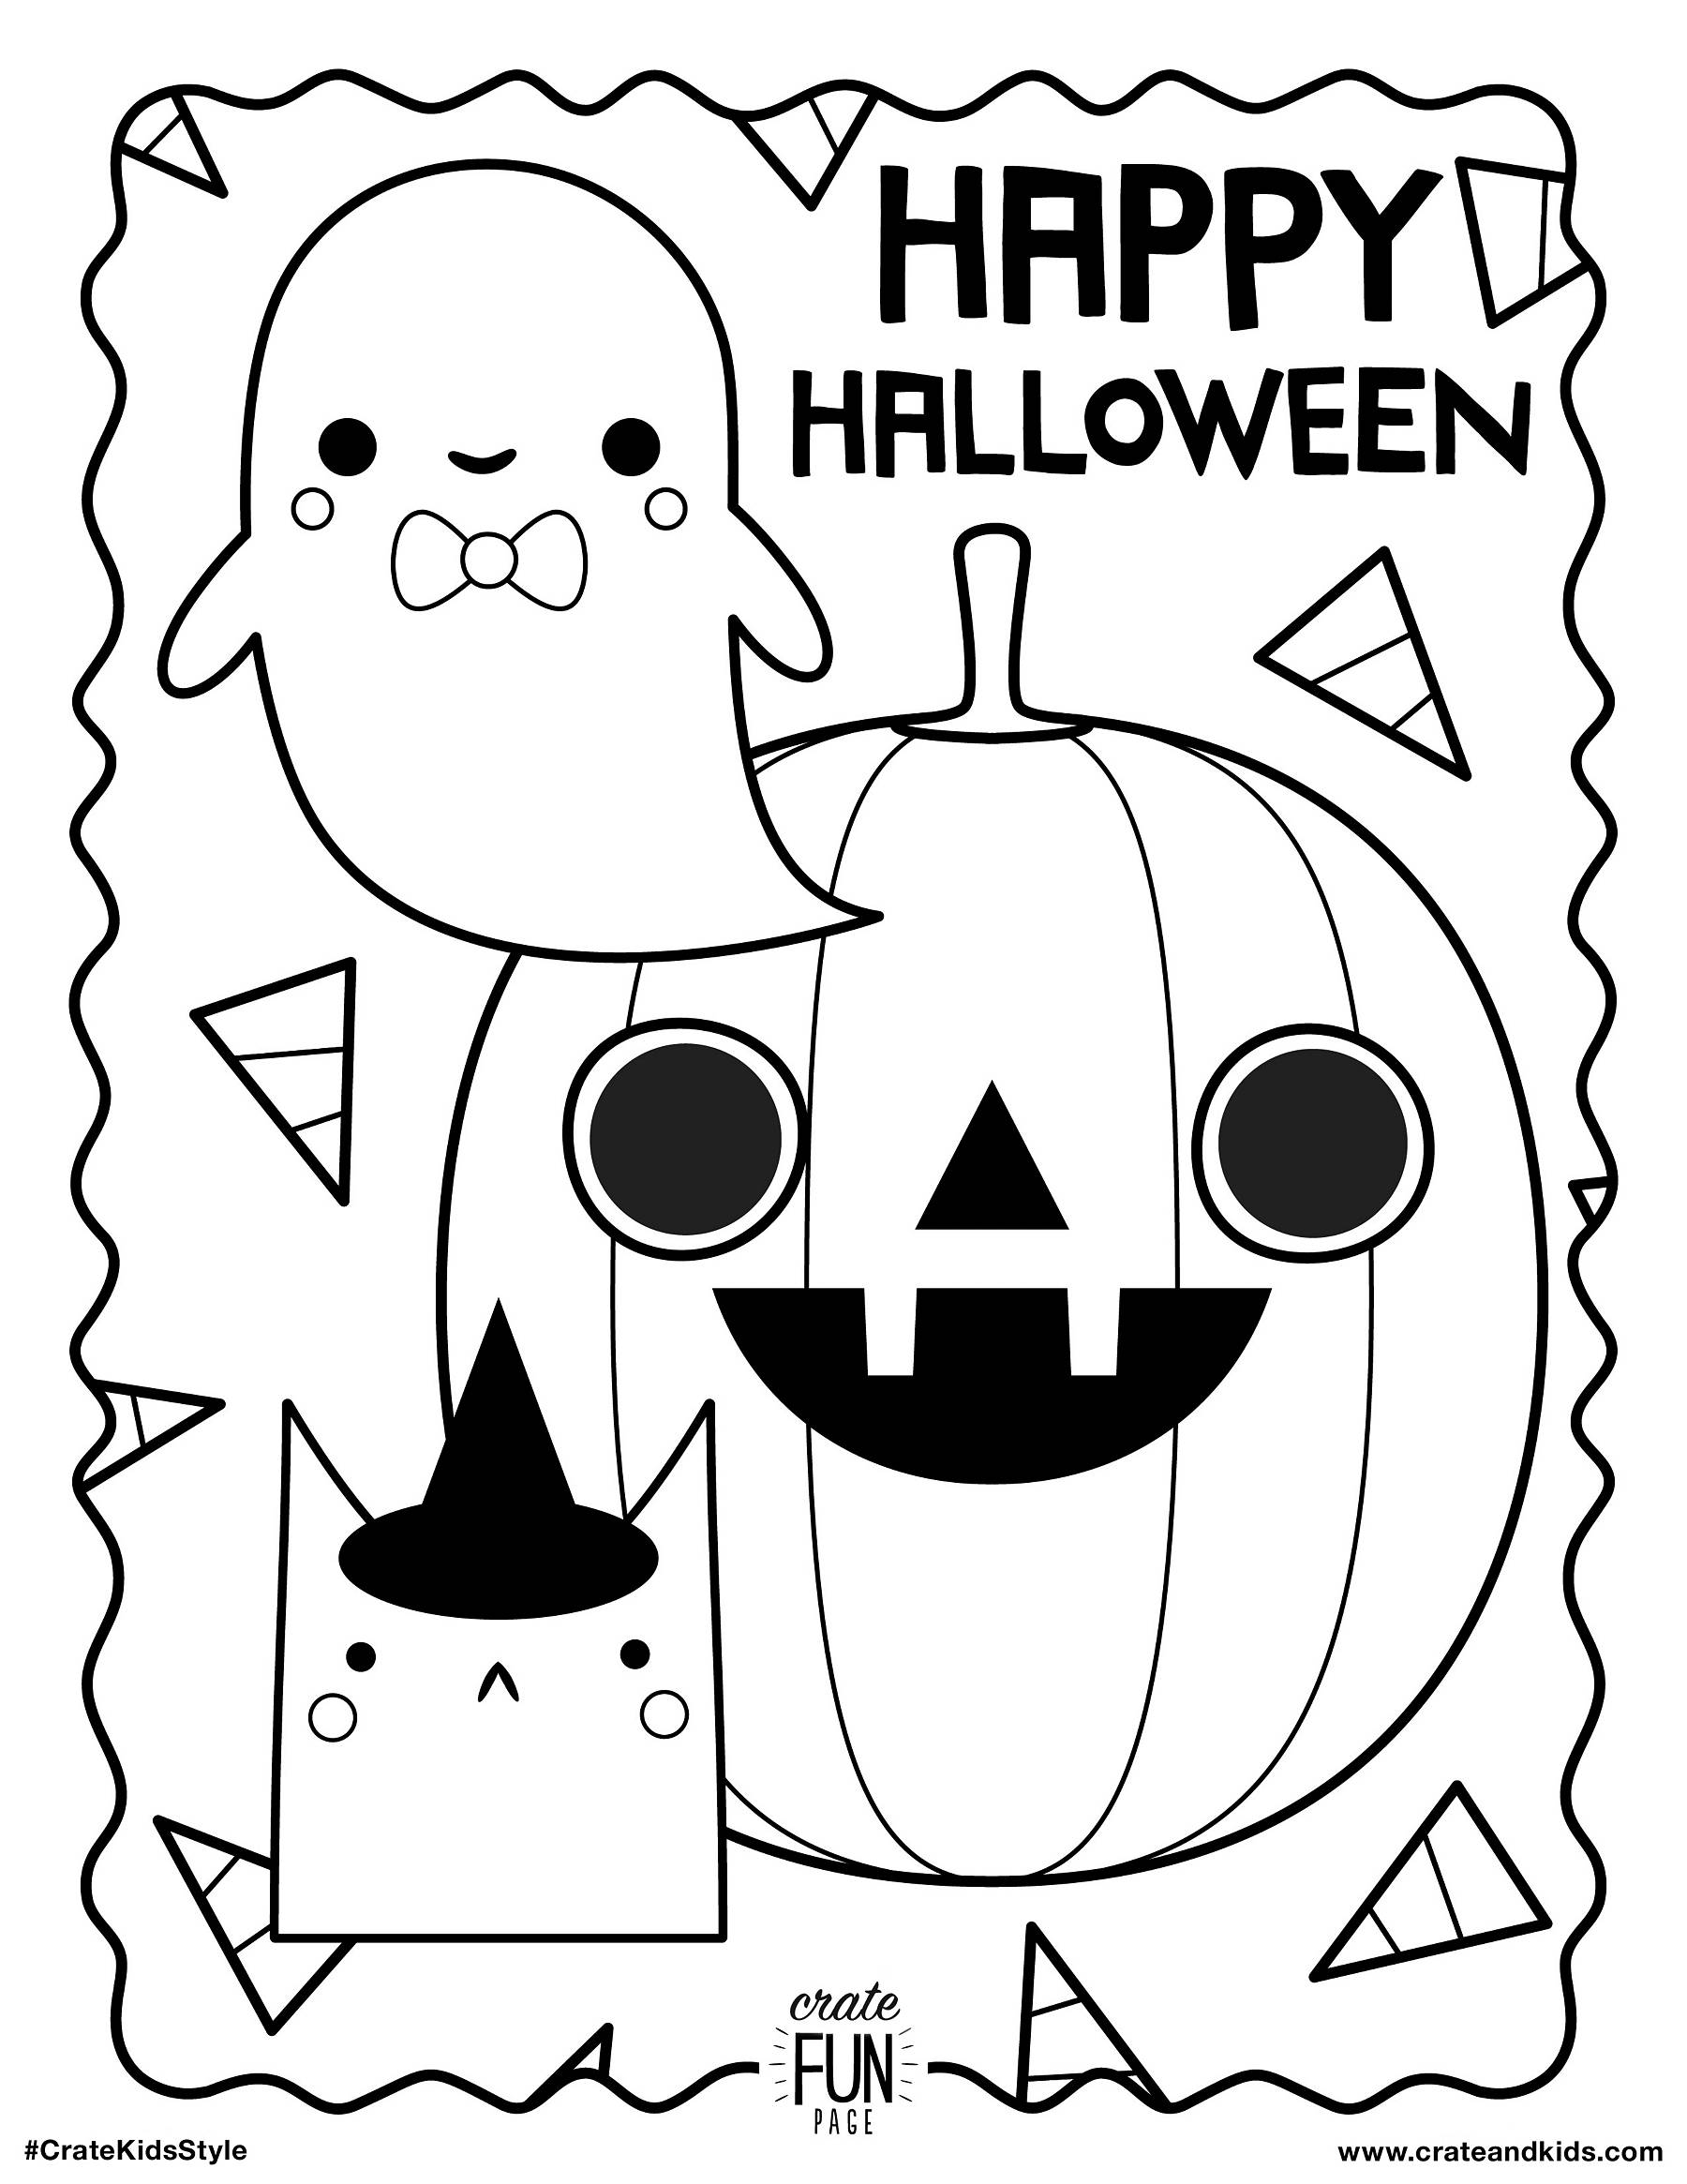 kids-halloween-free-printable-coloring-page-crate-kids-canada